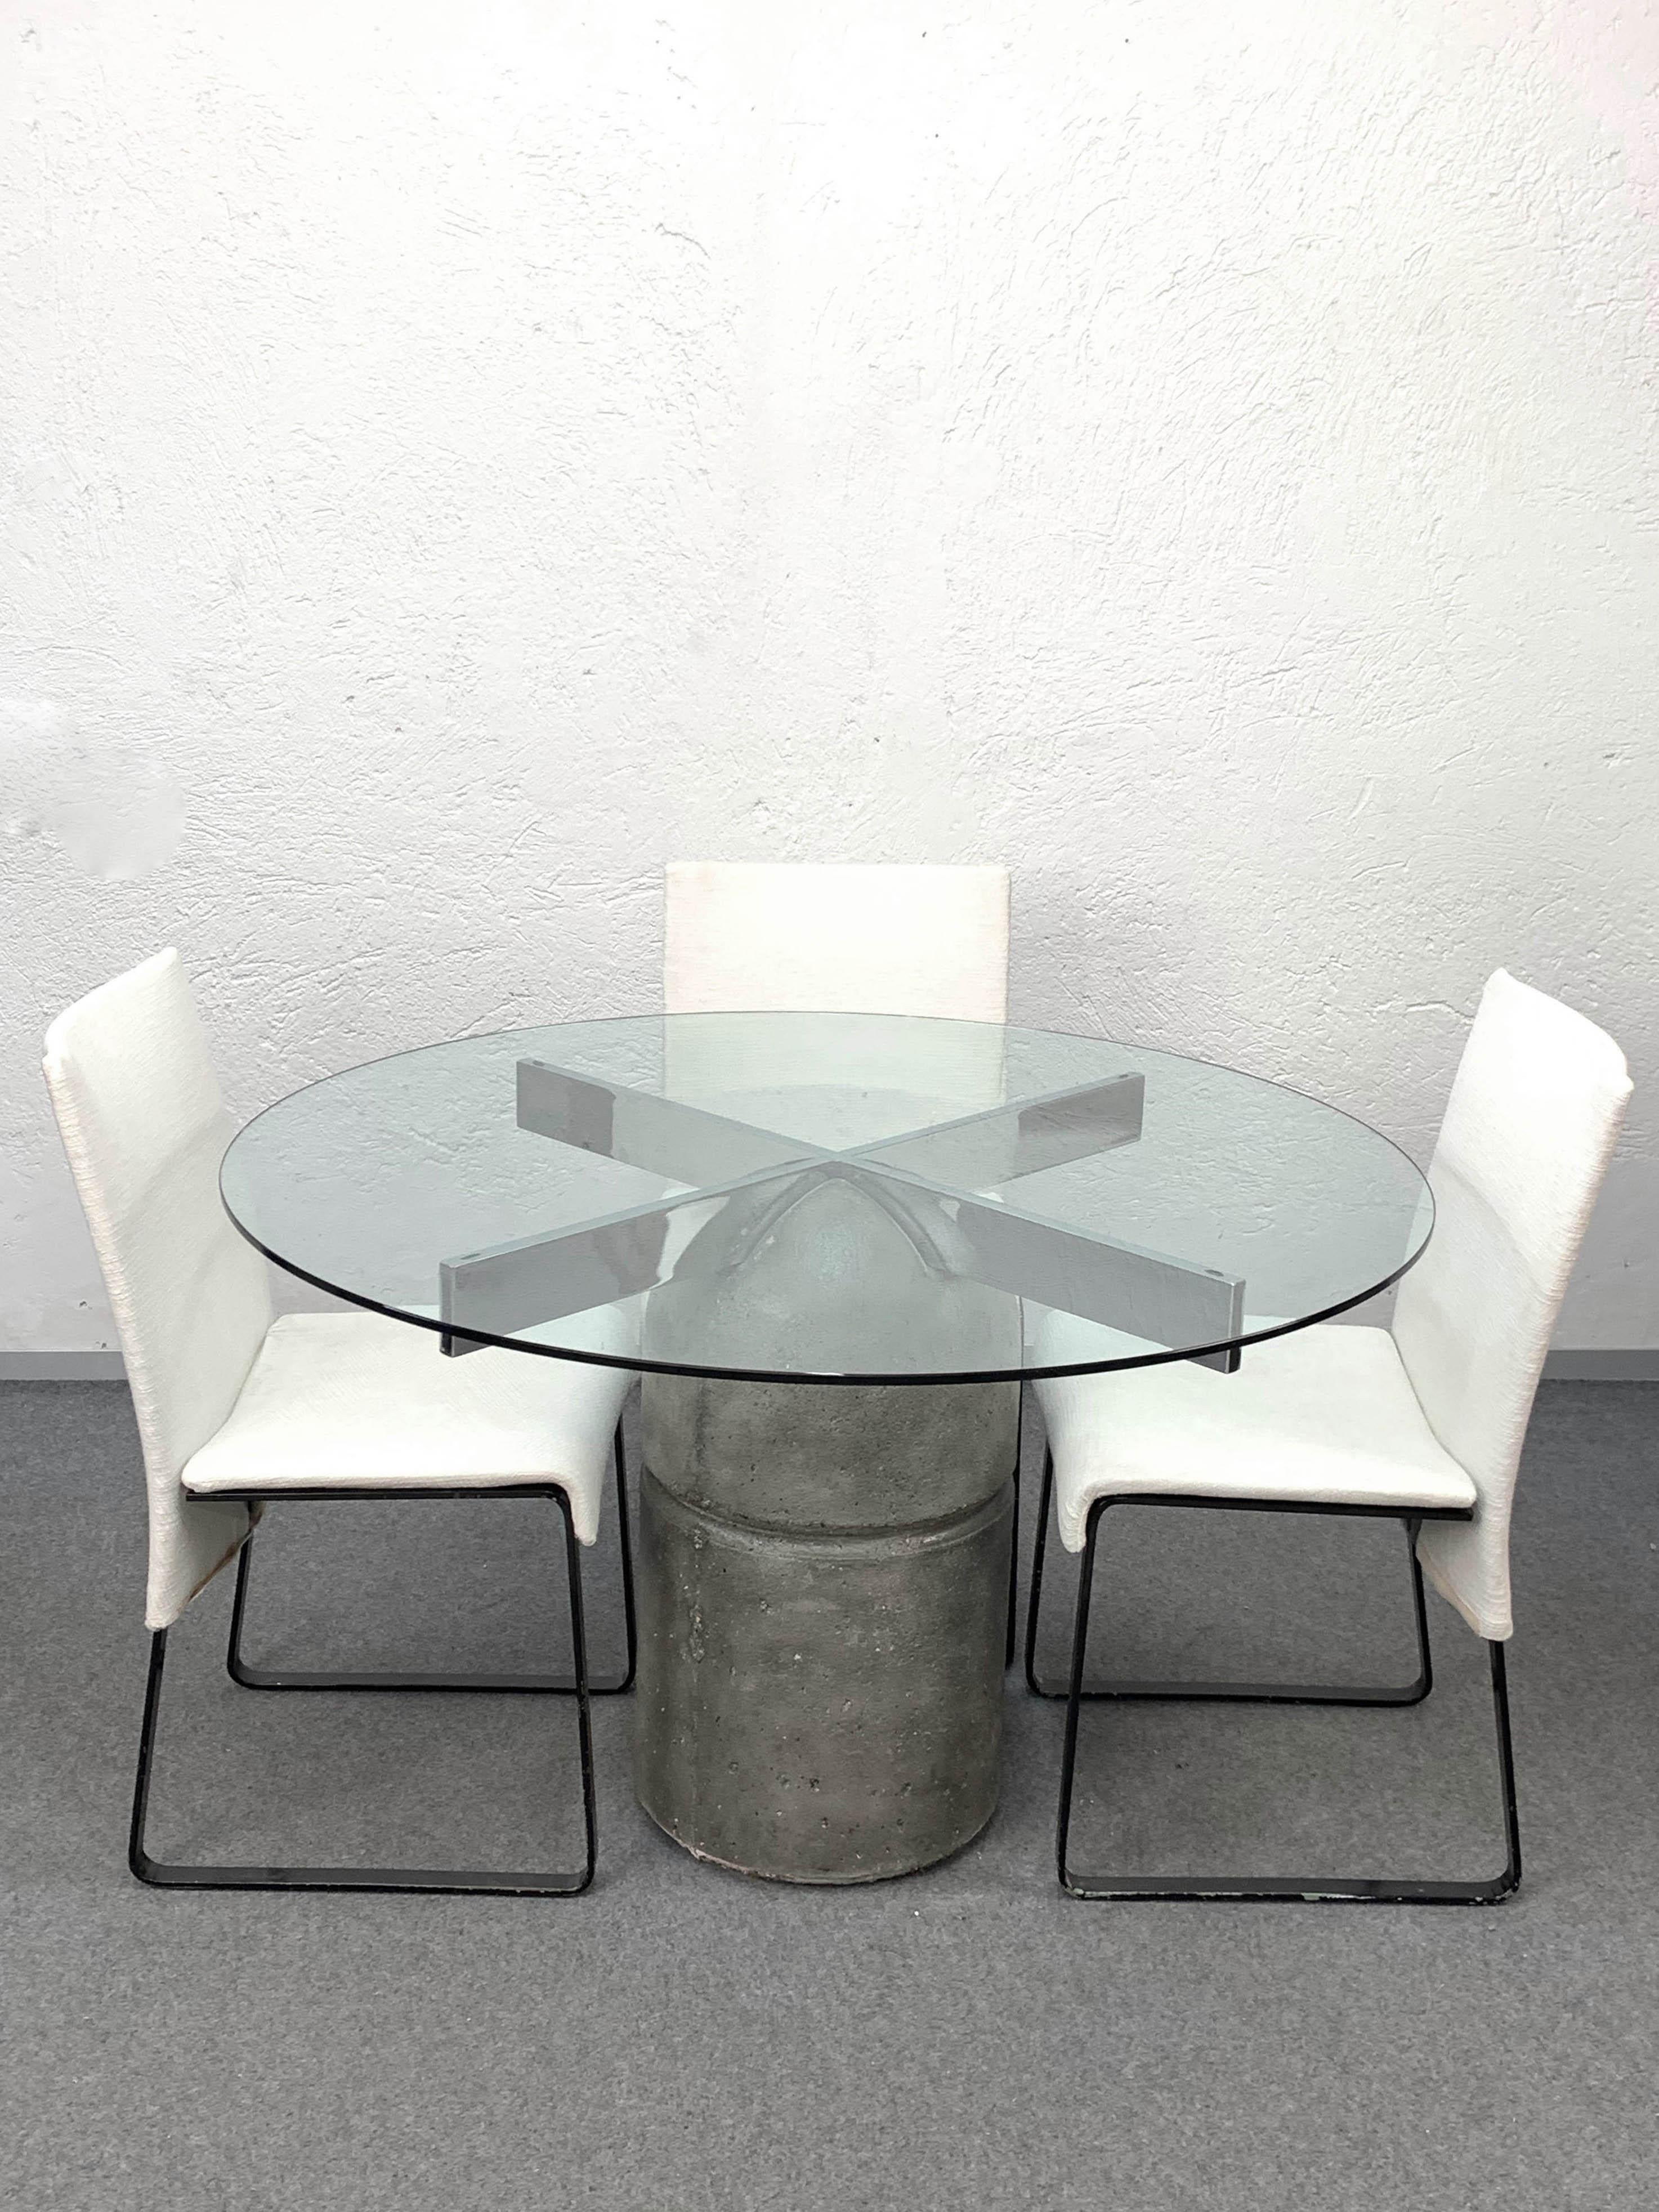 Midcentury Giovanni Offredi Paracarro Dining Table and Chairs for Saporiti, 1973 In Good Condition For Sale In Roma, IT